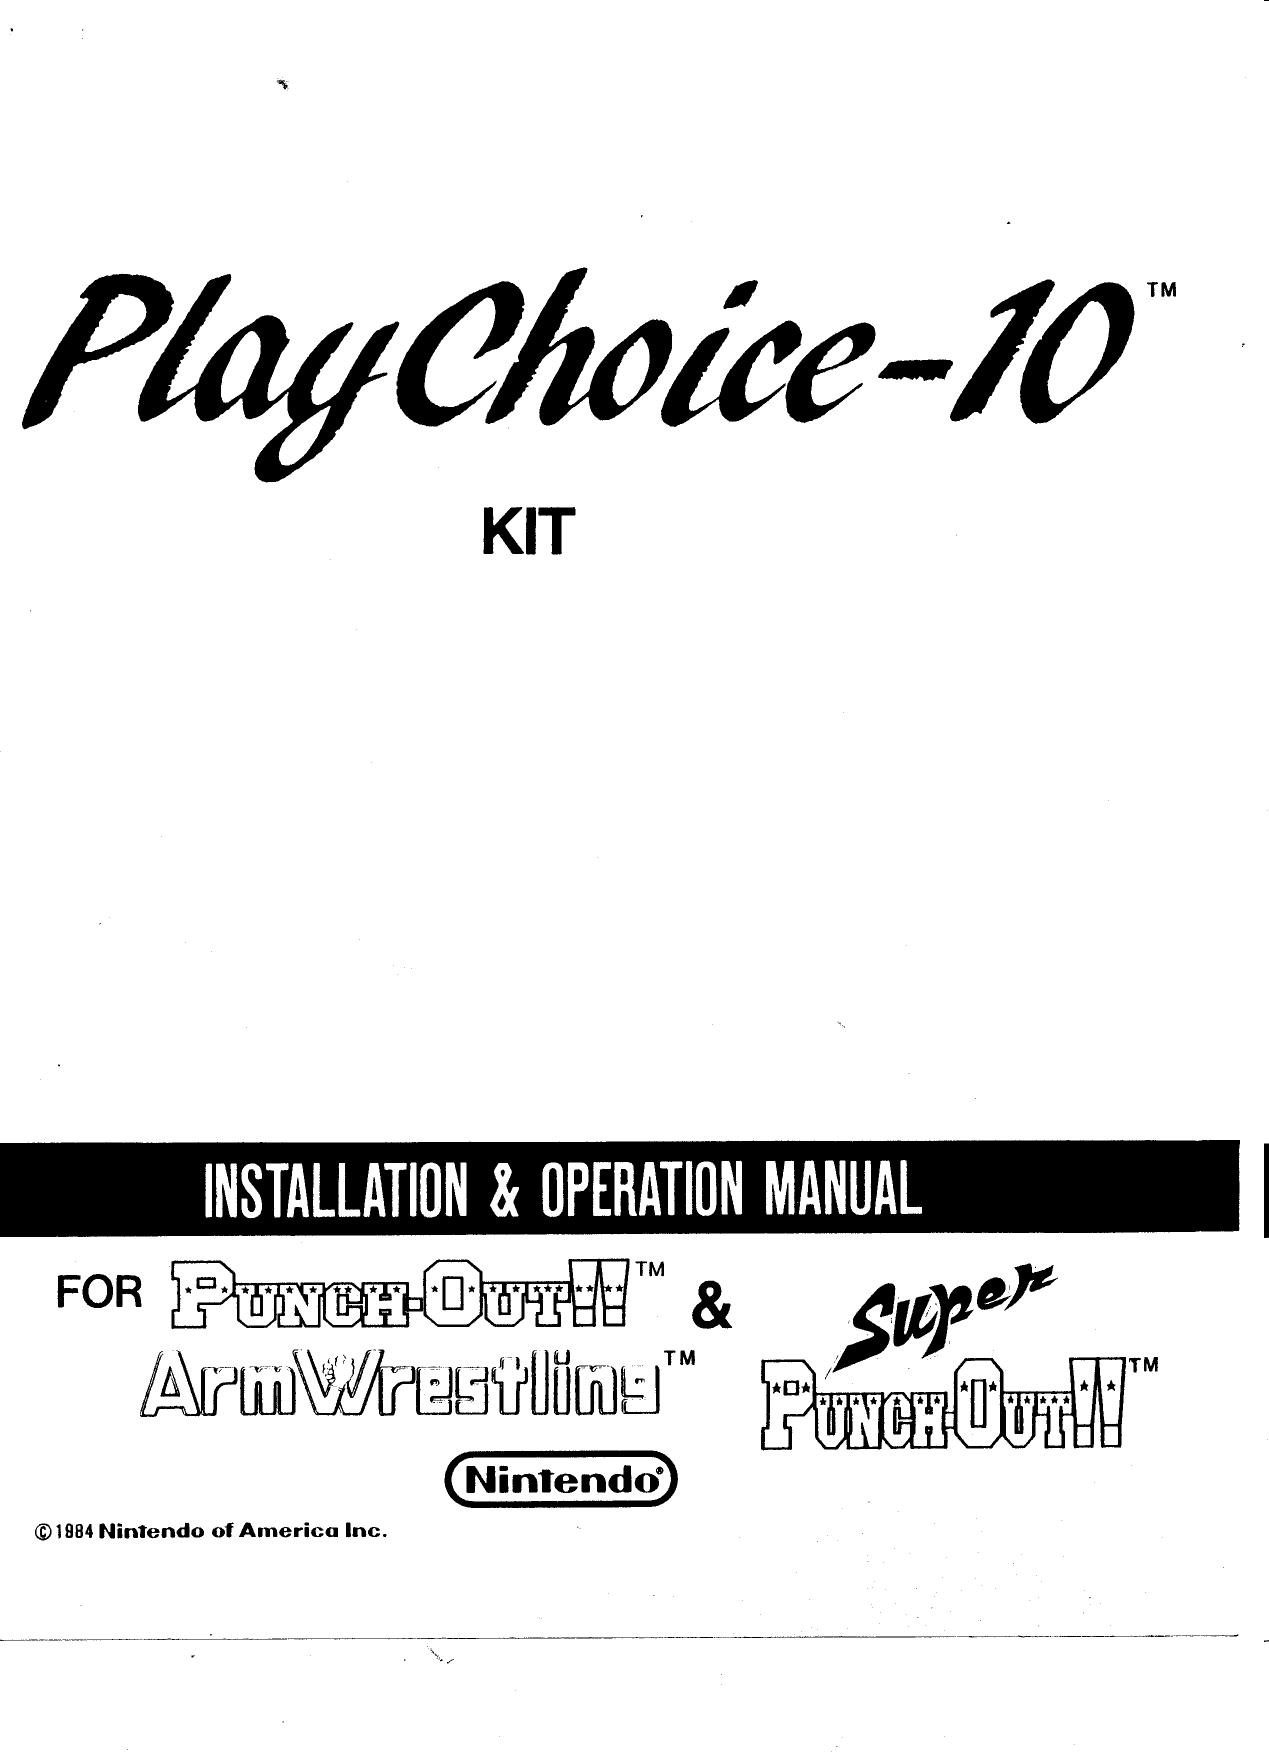 Play Choice 10 Kit Manual for Arm Wrestling Punch Out and Super Punch Out